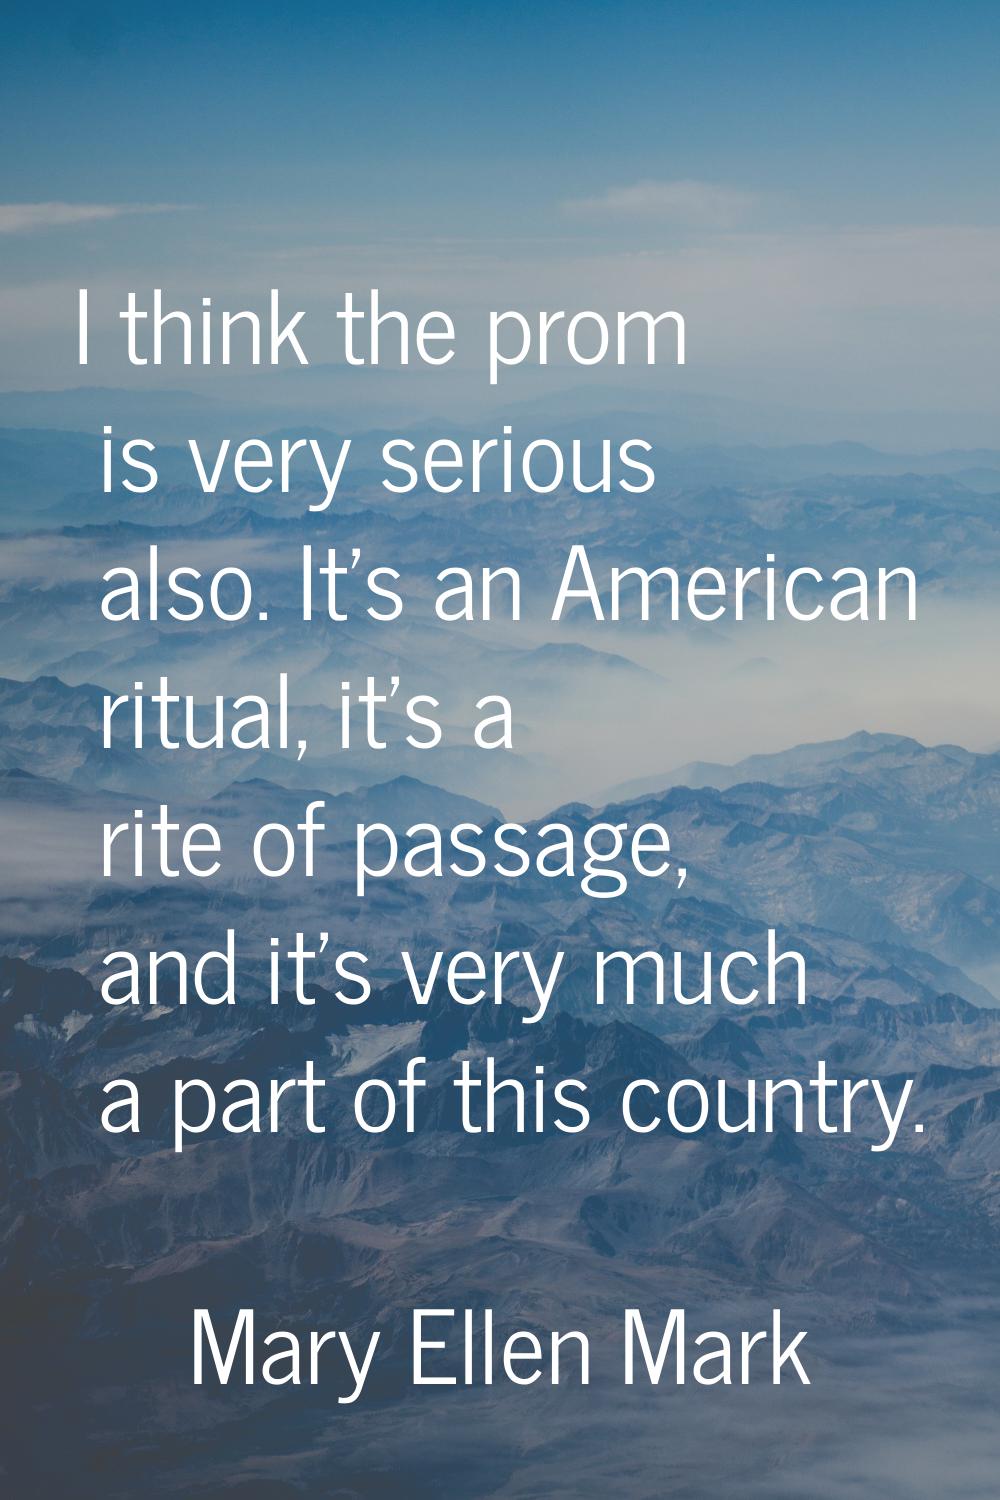 I think the prom is very serious also. It's an American ritual, it's a rite of passage, and it's ve